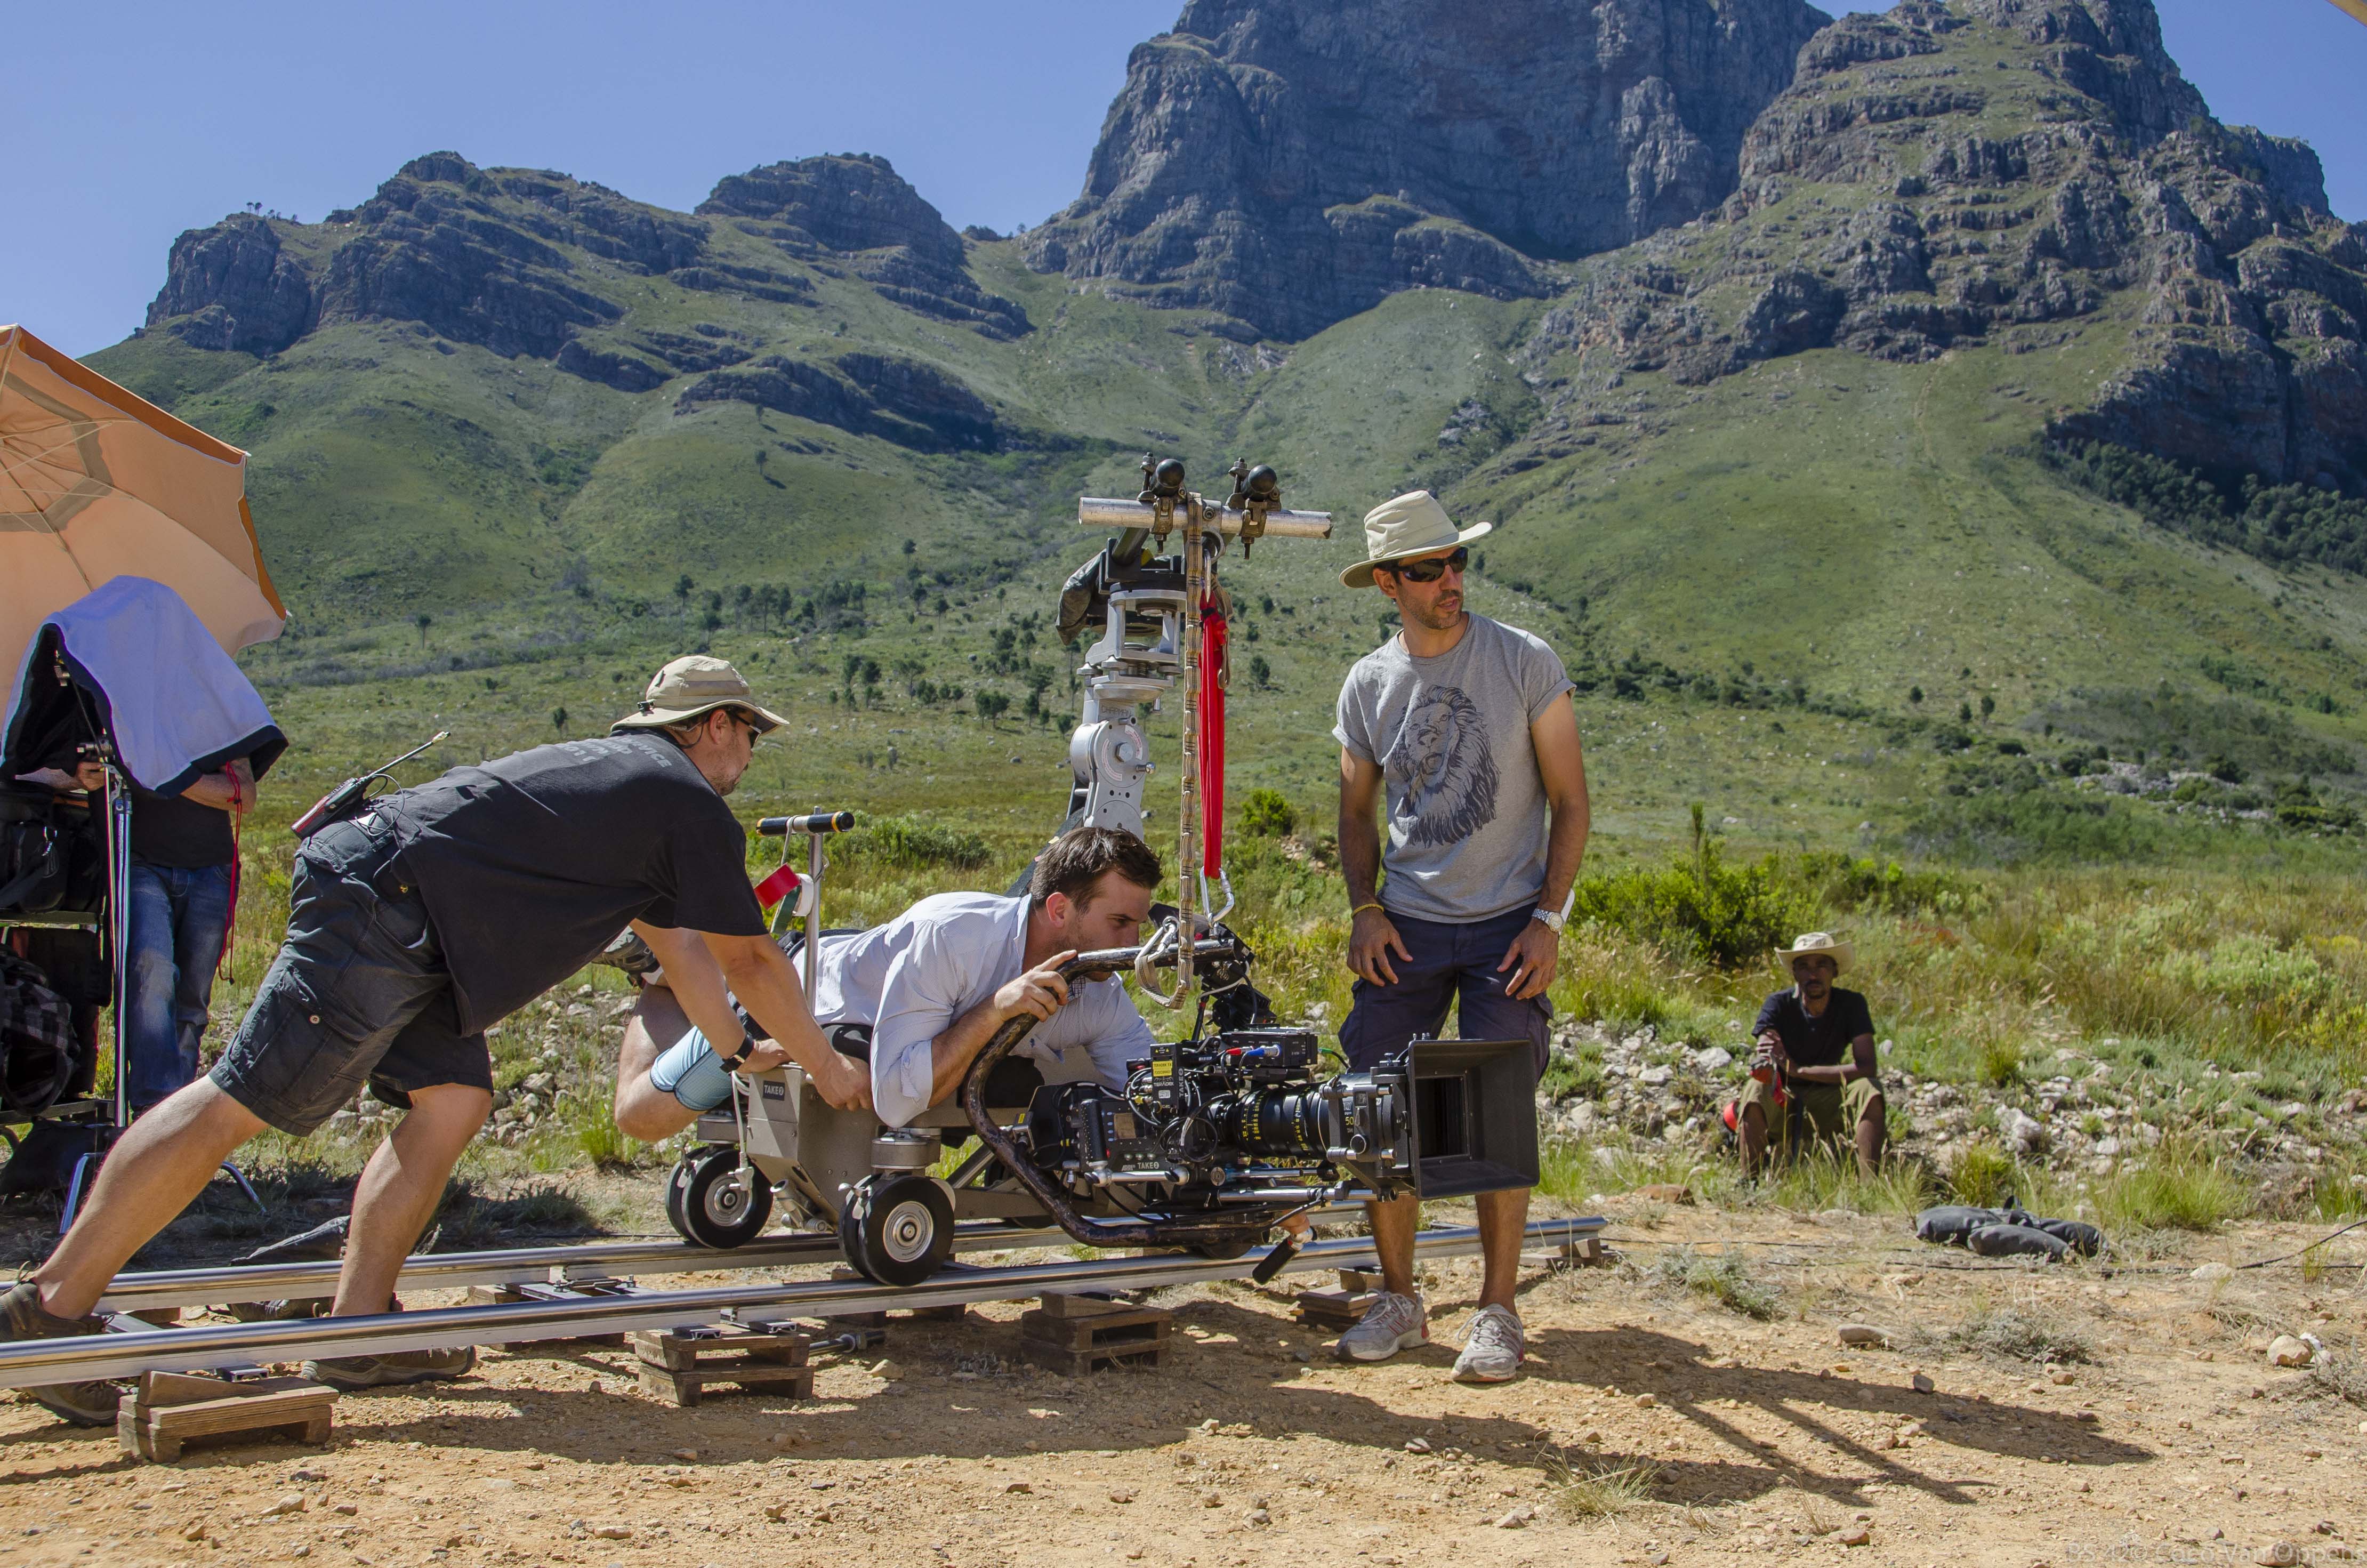 Still of David Sant shooting in South Africa. Michael Carstensen behind the camera.